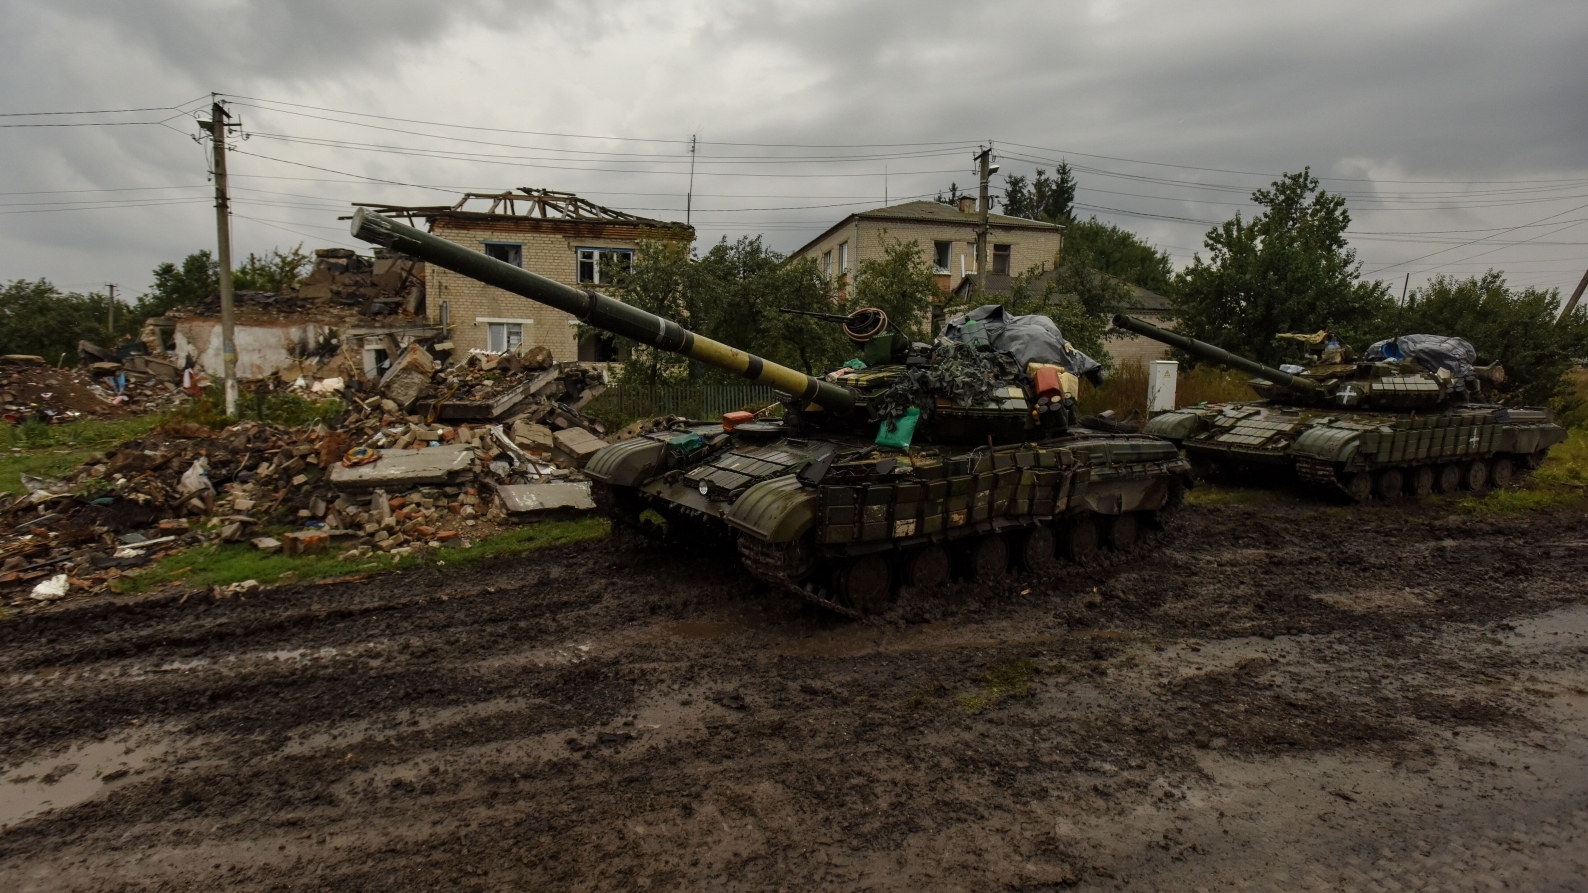 The Russians shelled a strategic object. Puppet theater in ruins